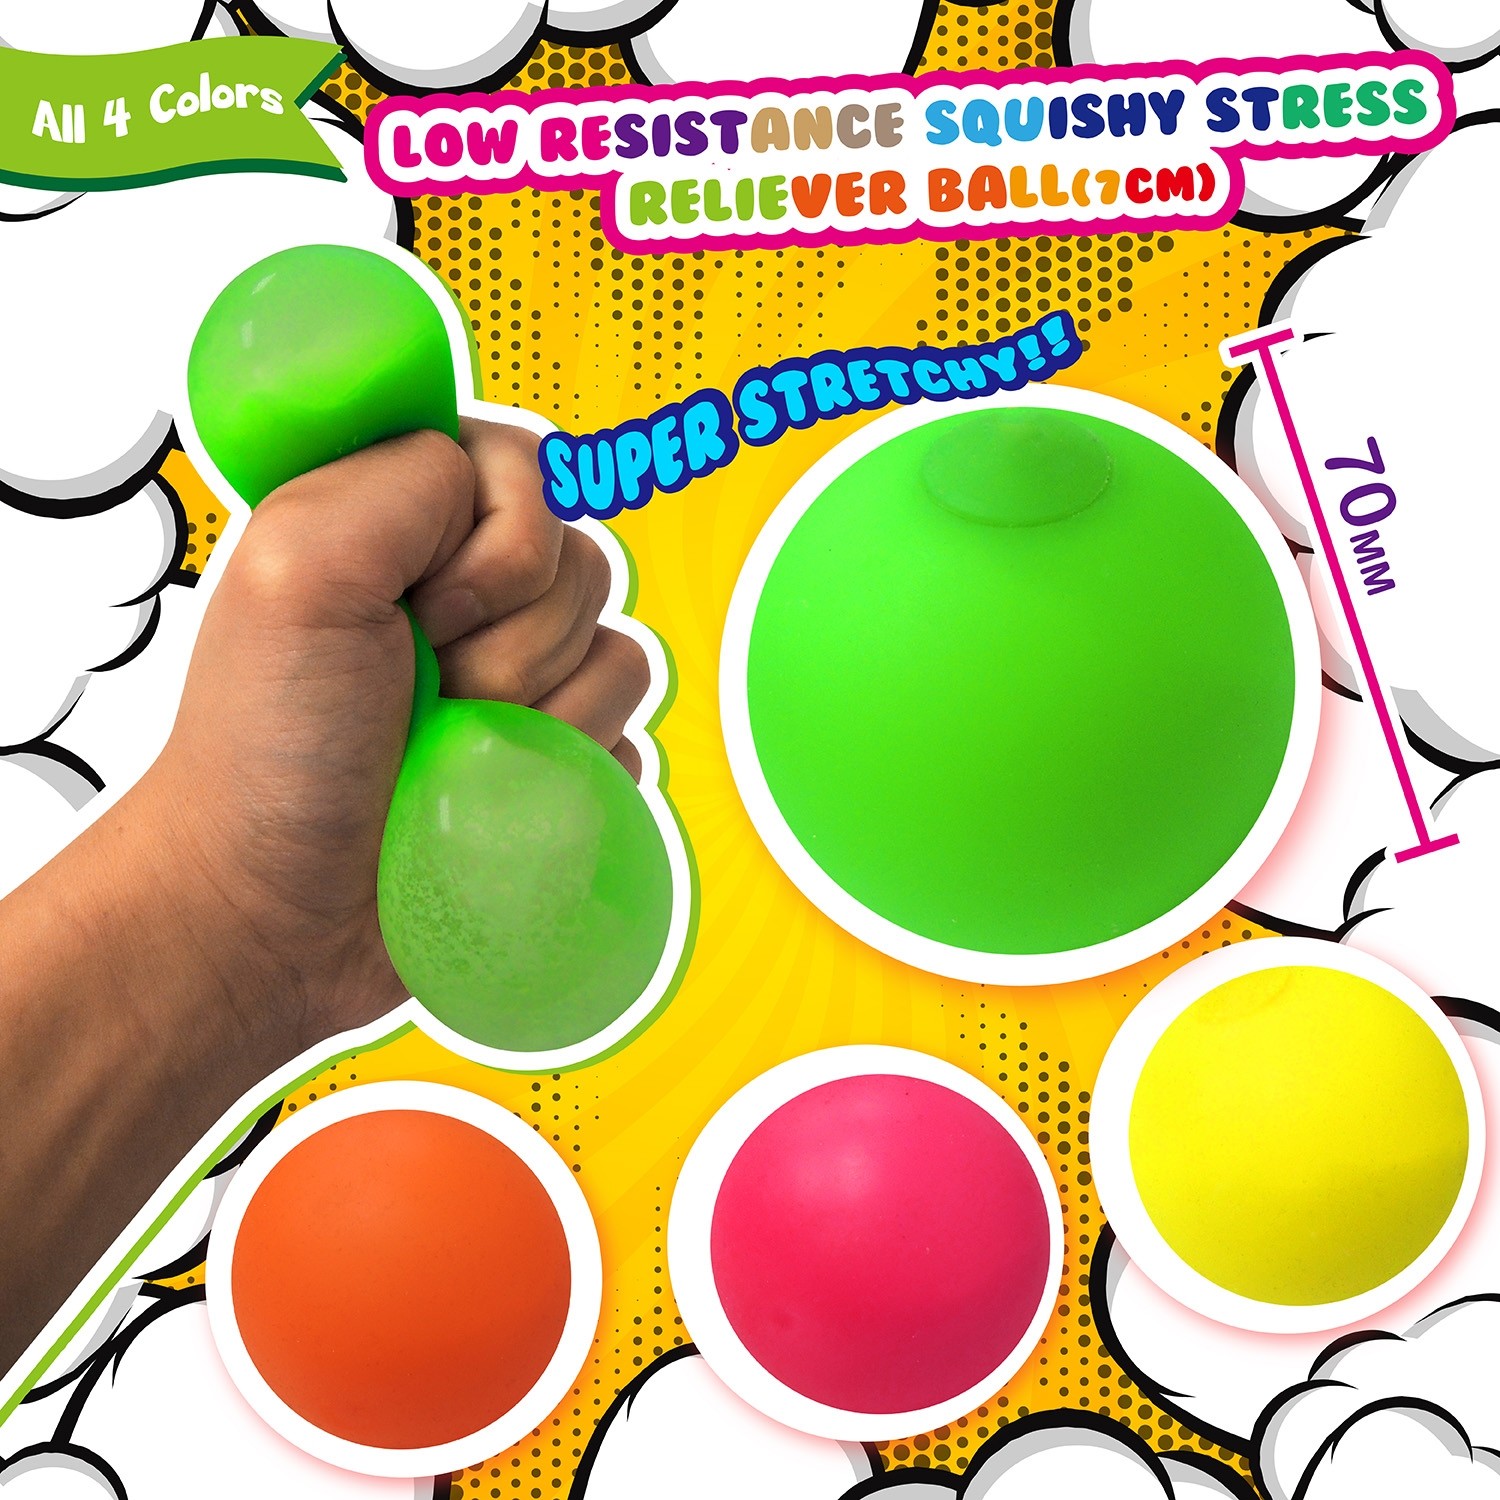 Low Resistance Squishy Stress Reliever Ball (7cm)